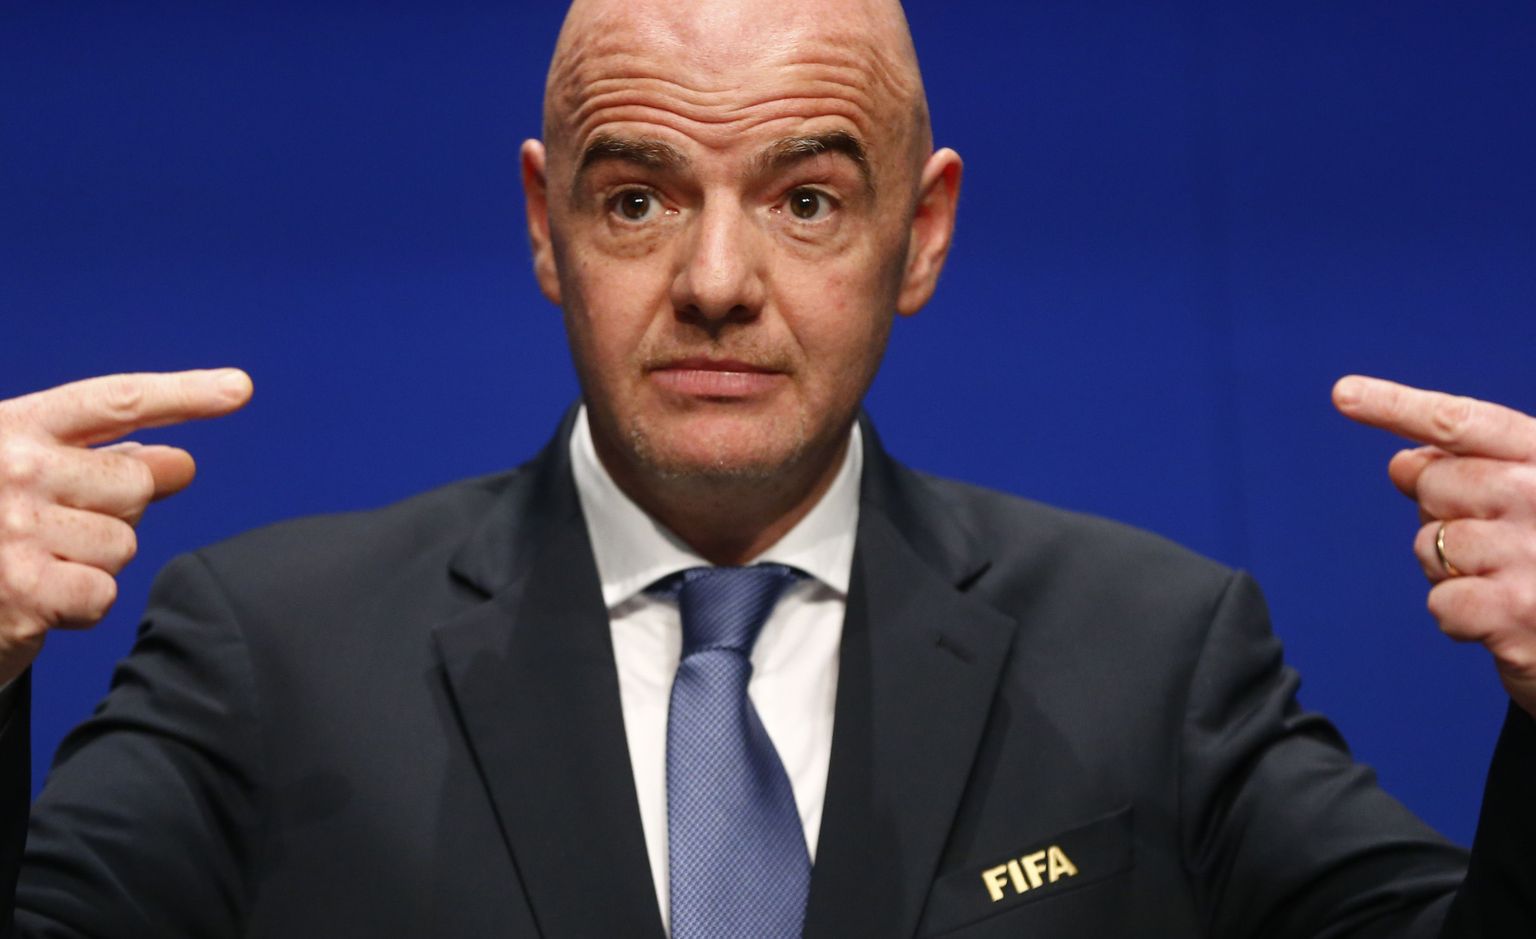 FIFA President Gianni Infantino addresses a news conference after a FIFA Council in Zurich, Switzerland, January 10, 2017. REUTERS/Arnd Wiegmann